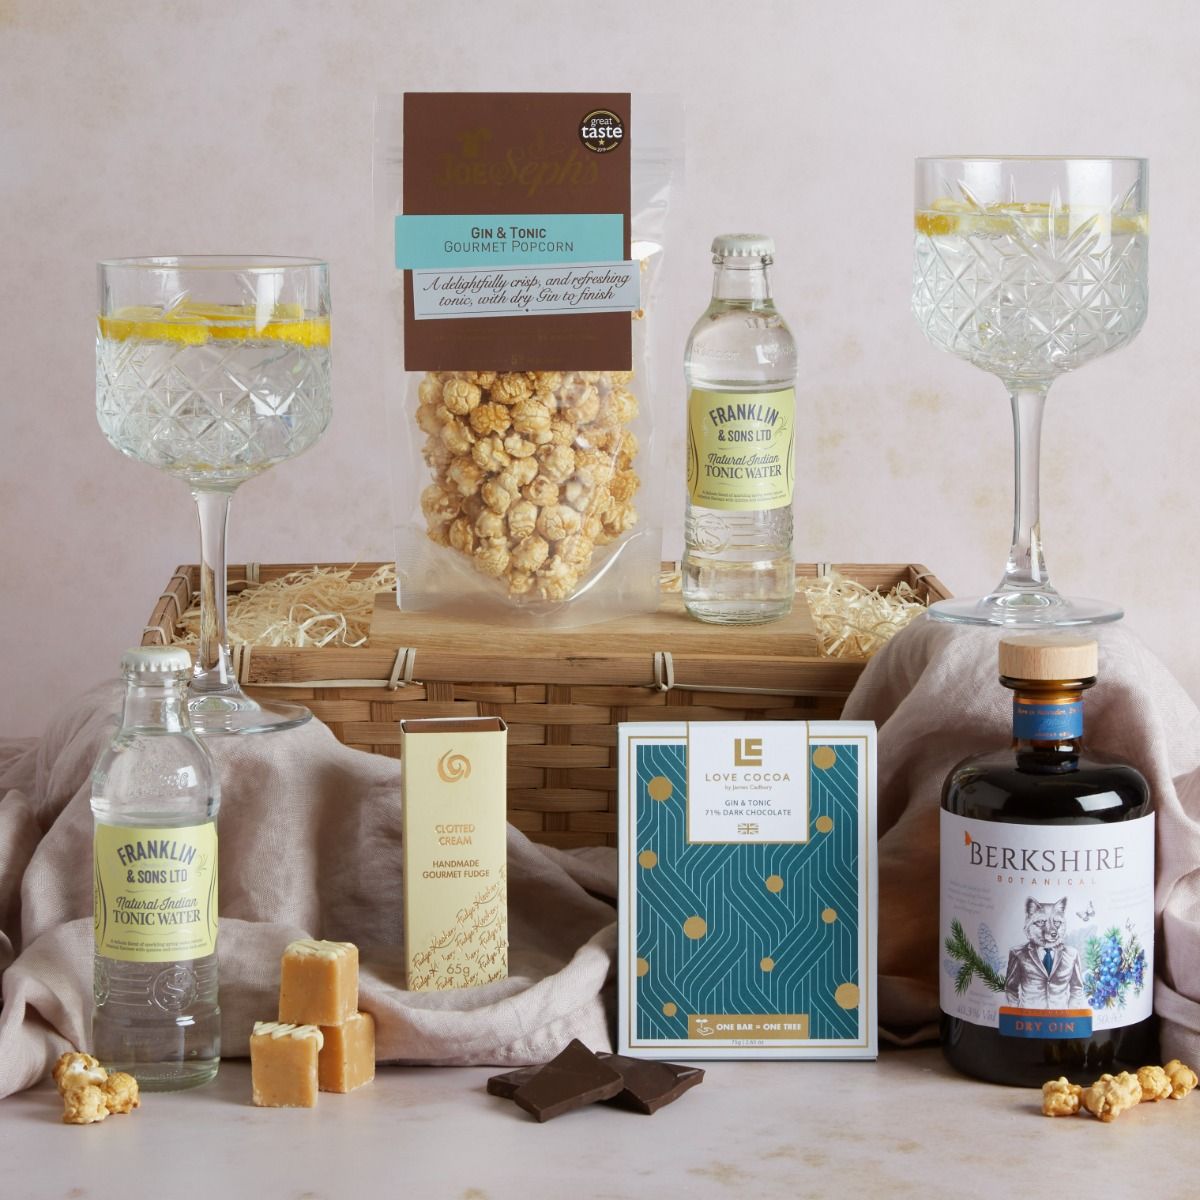 The Luxury Gin Hamper with contents on display and two glasses on gin and tonic with gift basket